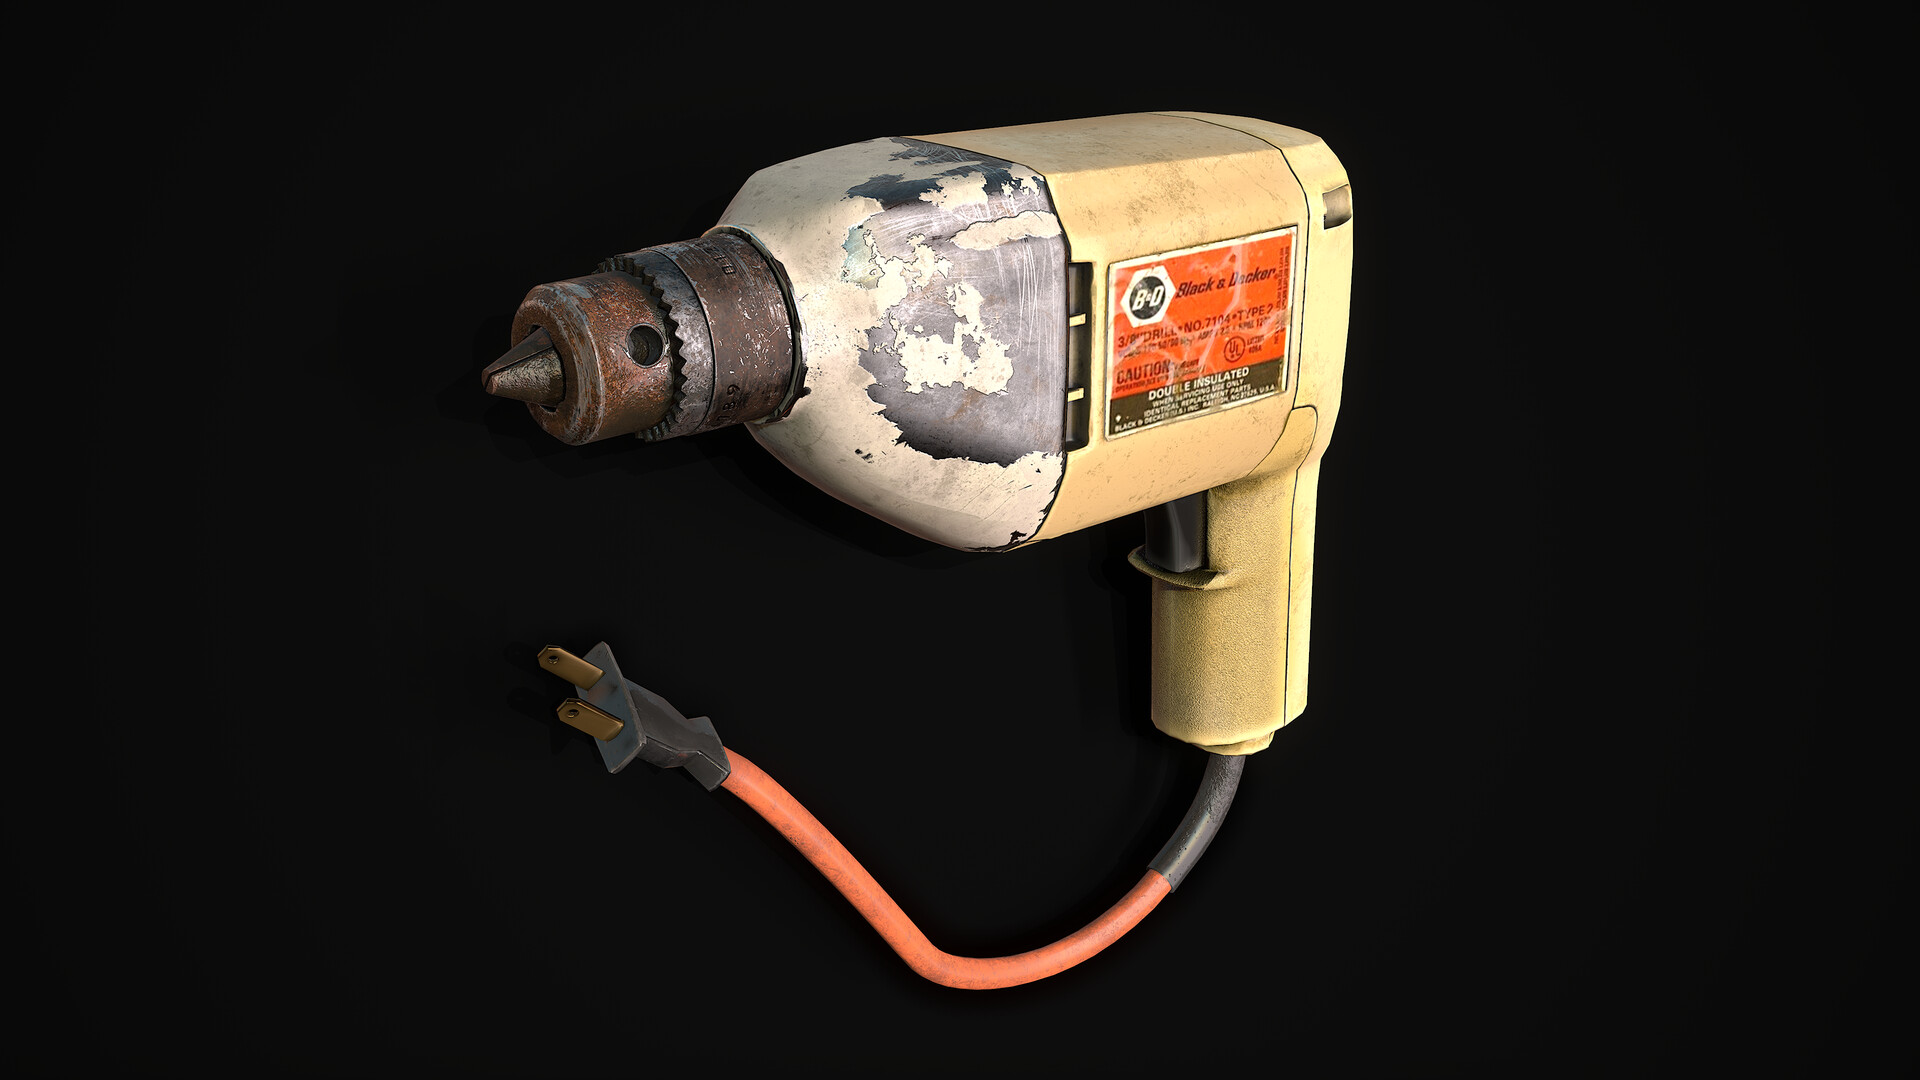 ArtStation - Old electric drill